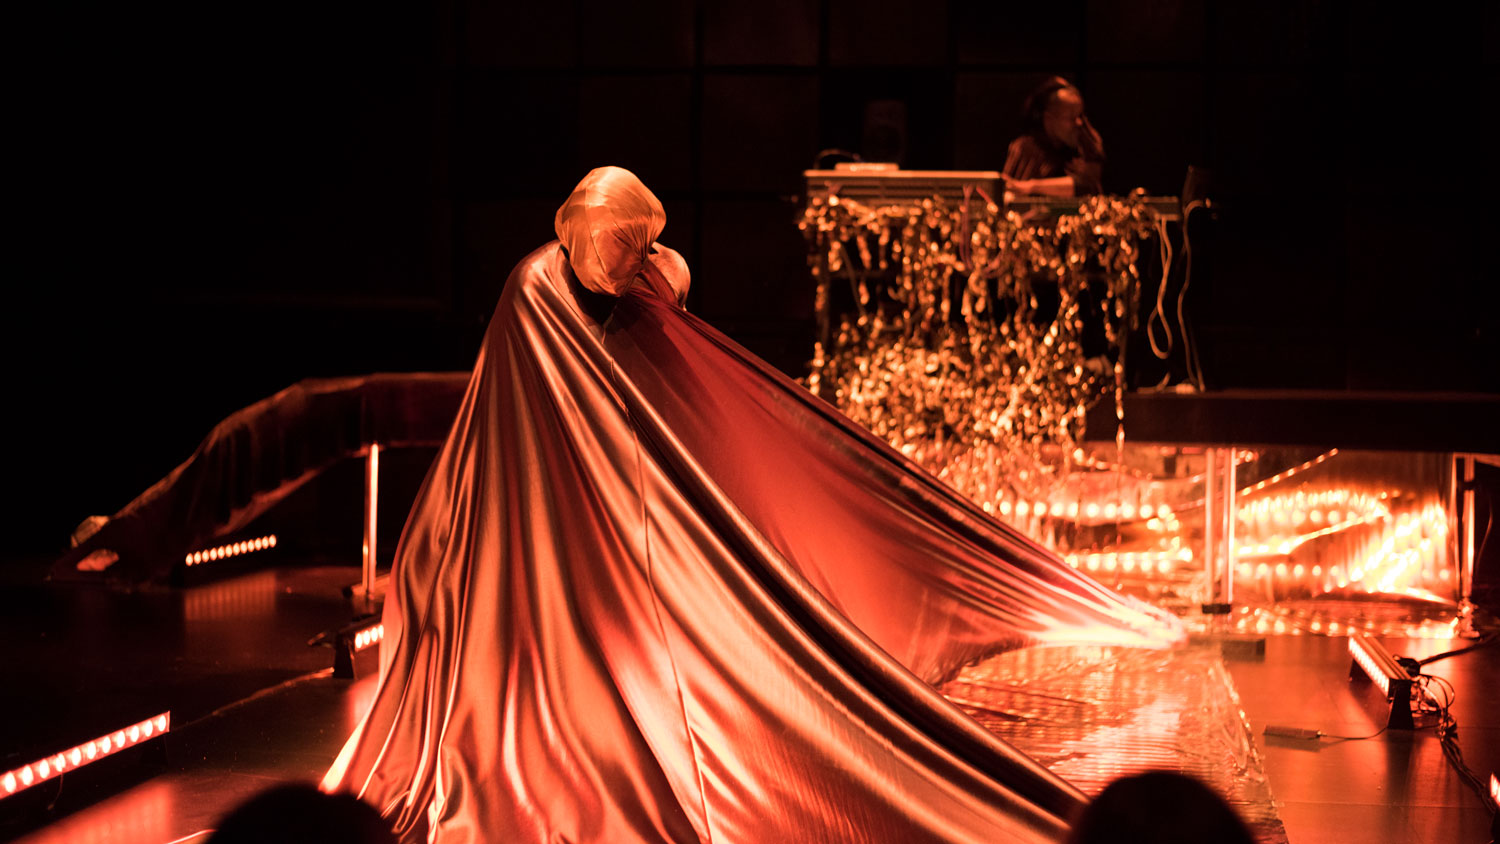 An human fully draped in cognac colored satin fabric twisting on a warmly lit stage. 